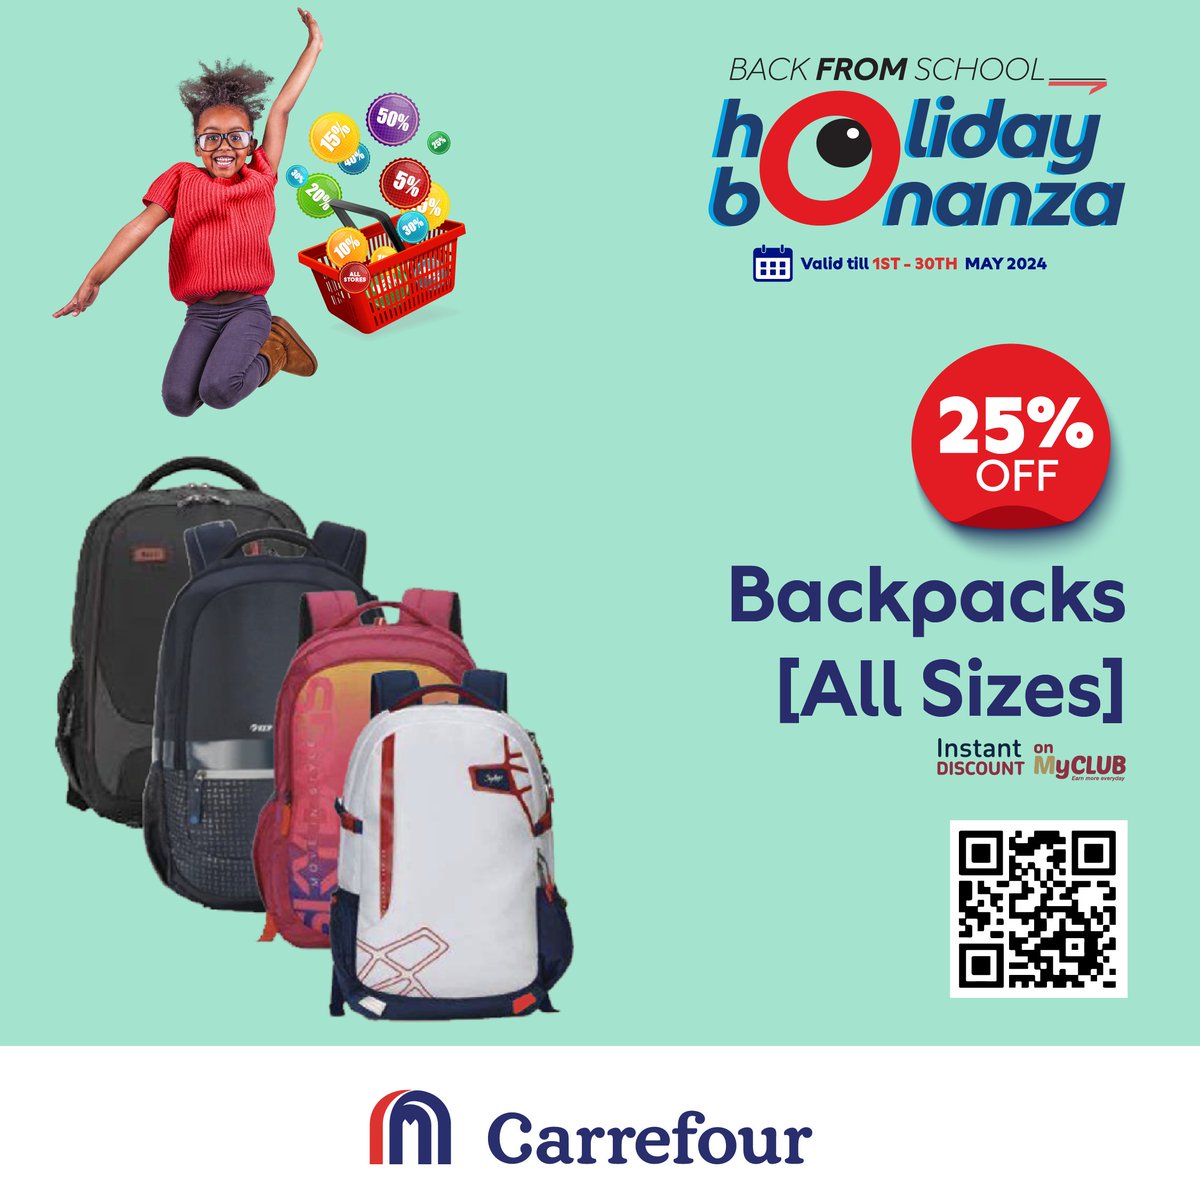 Out with the old, in with quality durable backpacks at 25% off and suitcases at 50% off. Visit any of our stores today to scoop this offer while it lasts. #MoreForYou #GreatMoments @MajidAlFuttaim